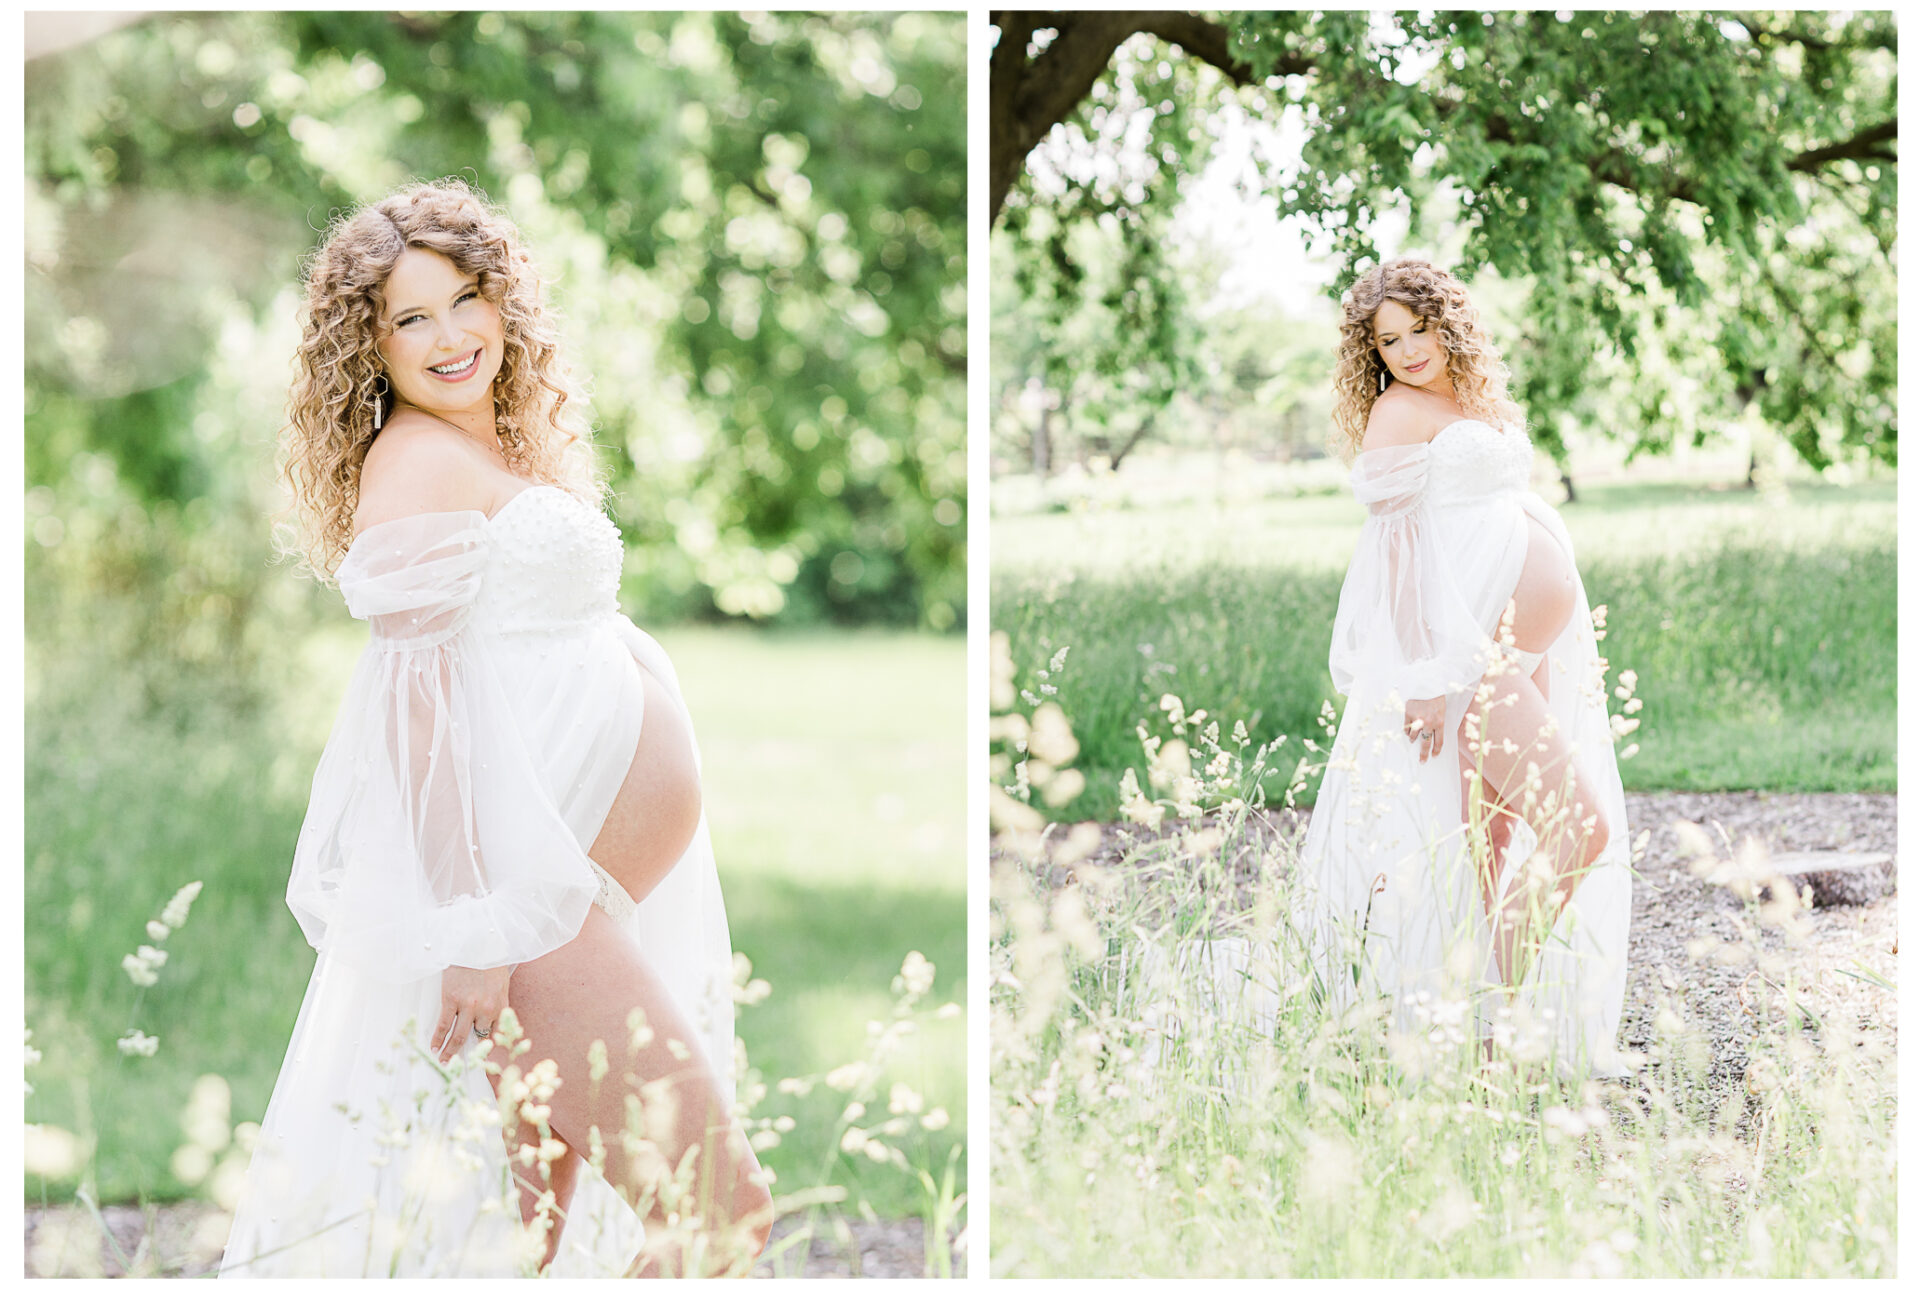 Winter Freire Photography | woman wearing a beautiful white gown during her outdoor summertime maternity session